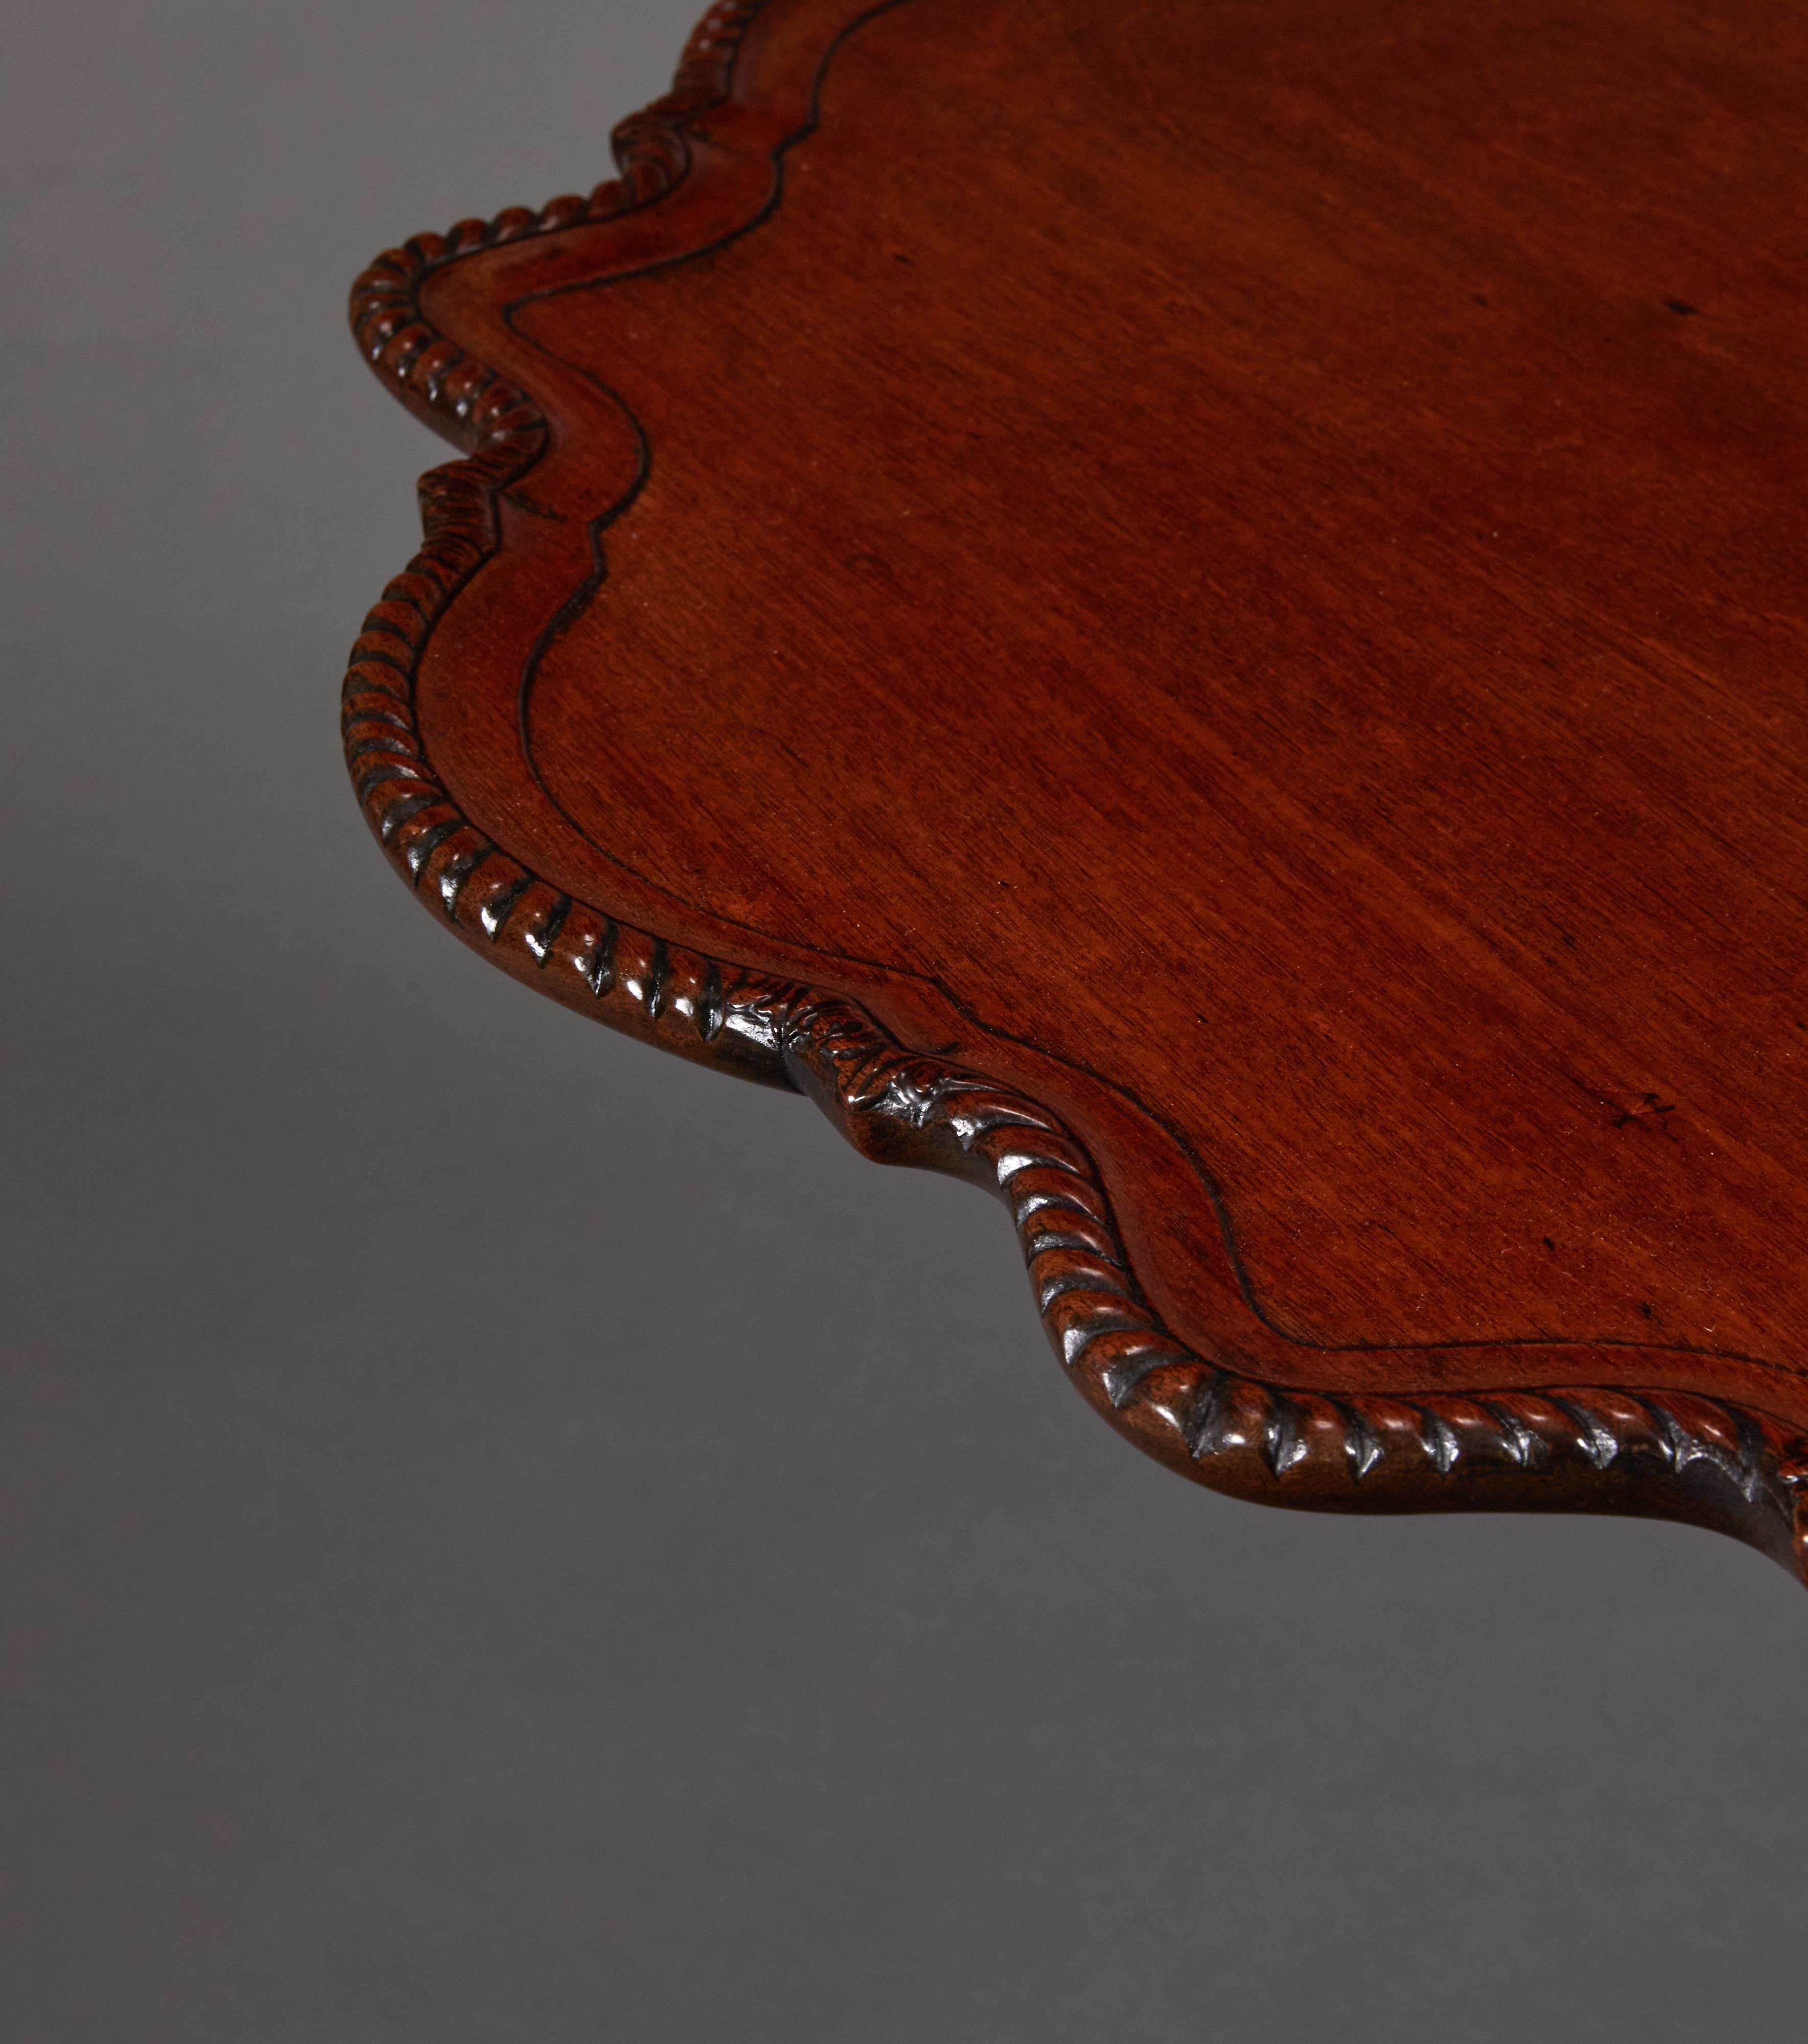 Dished-top with gadrooned edges raised on a birdcage support with fluted stem and carved cabriole legs and feet. Tilt-top folds to one side for storage. Folded measurement: 43 1/2